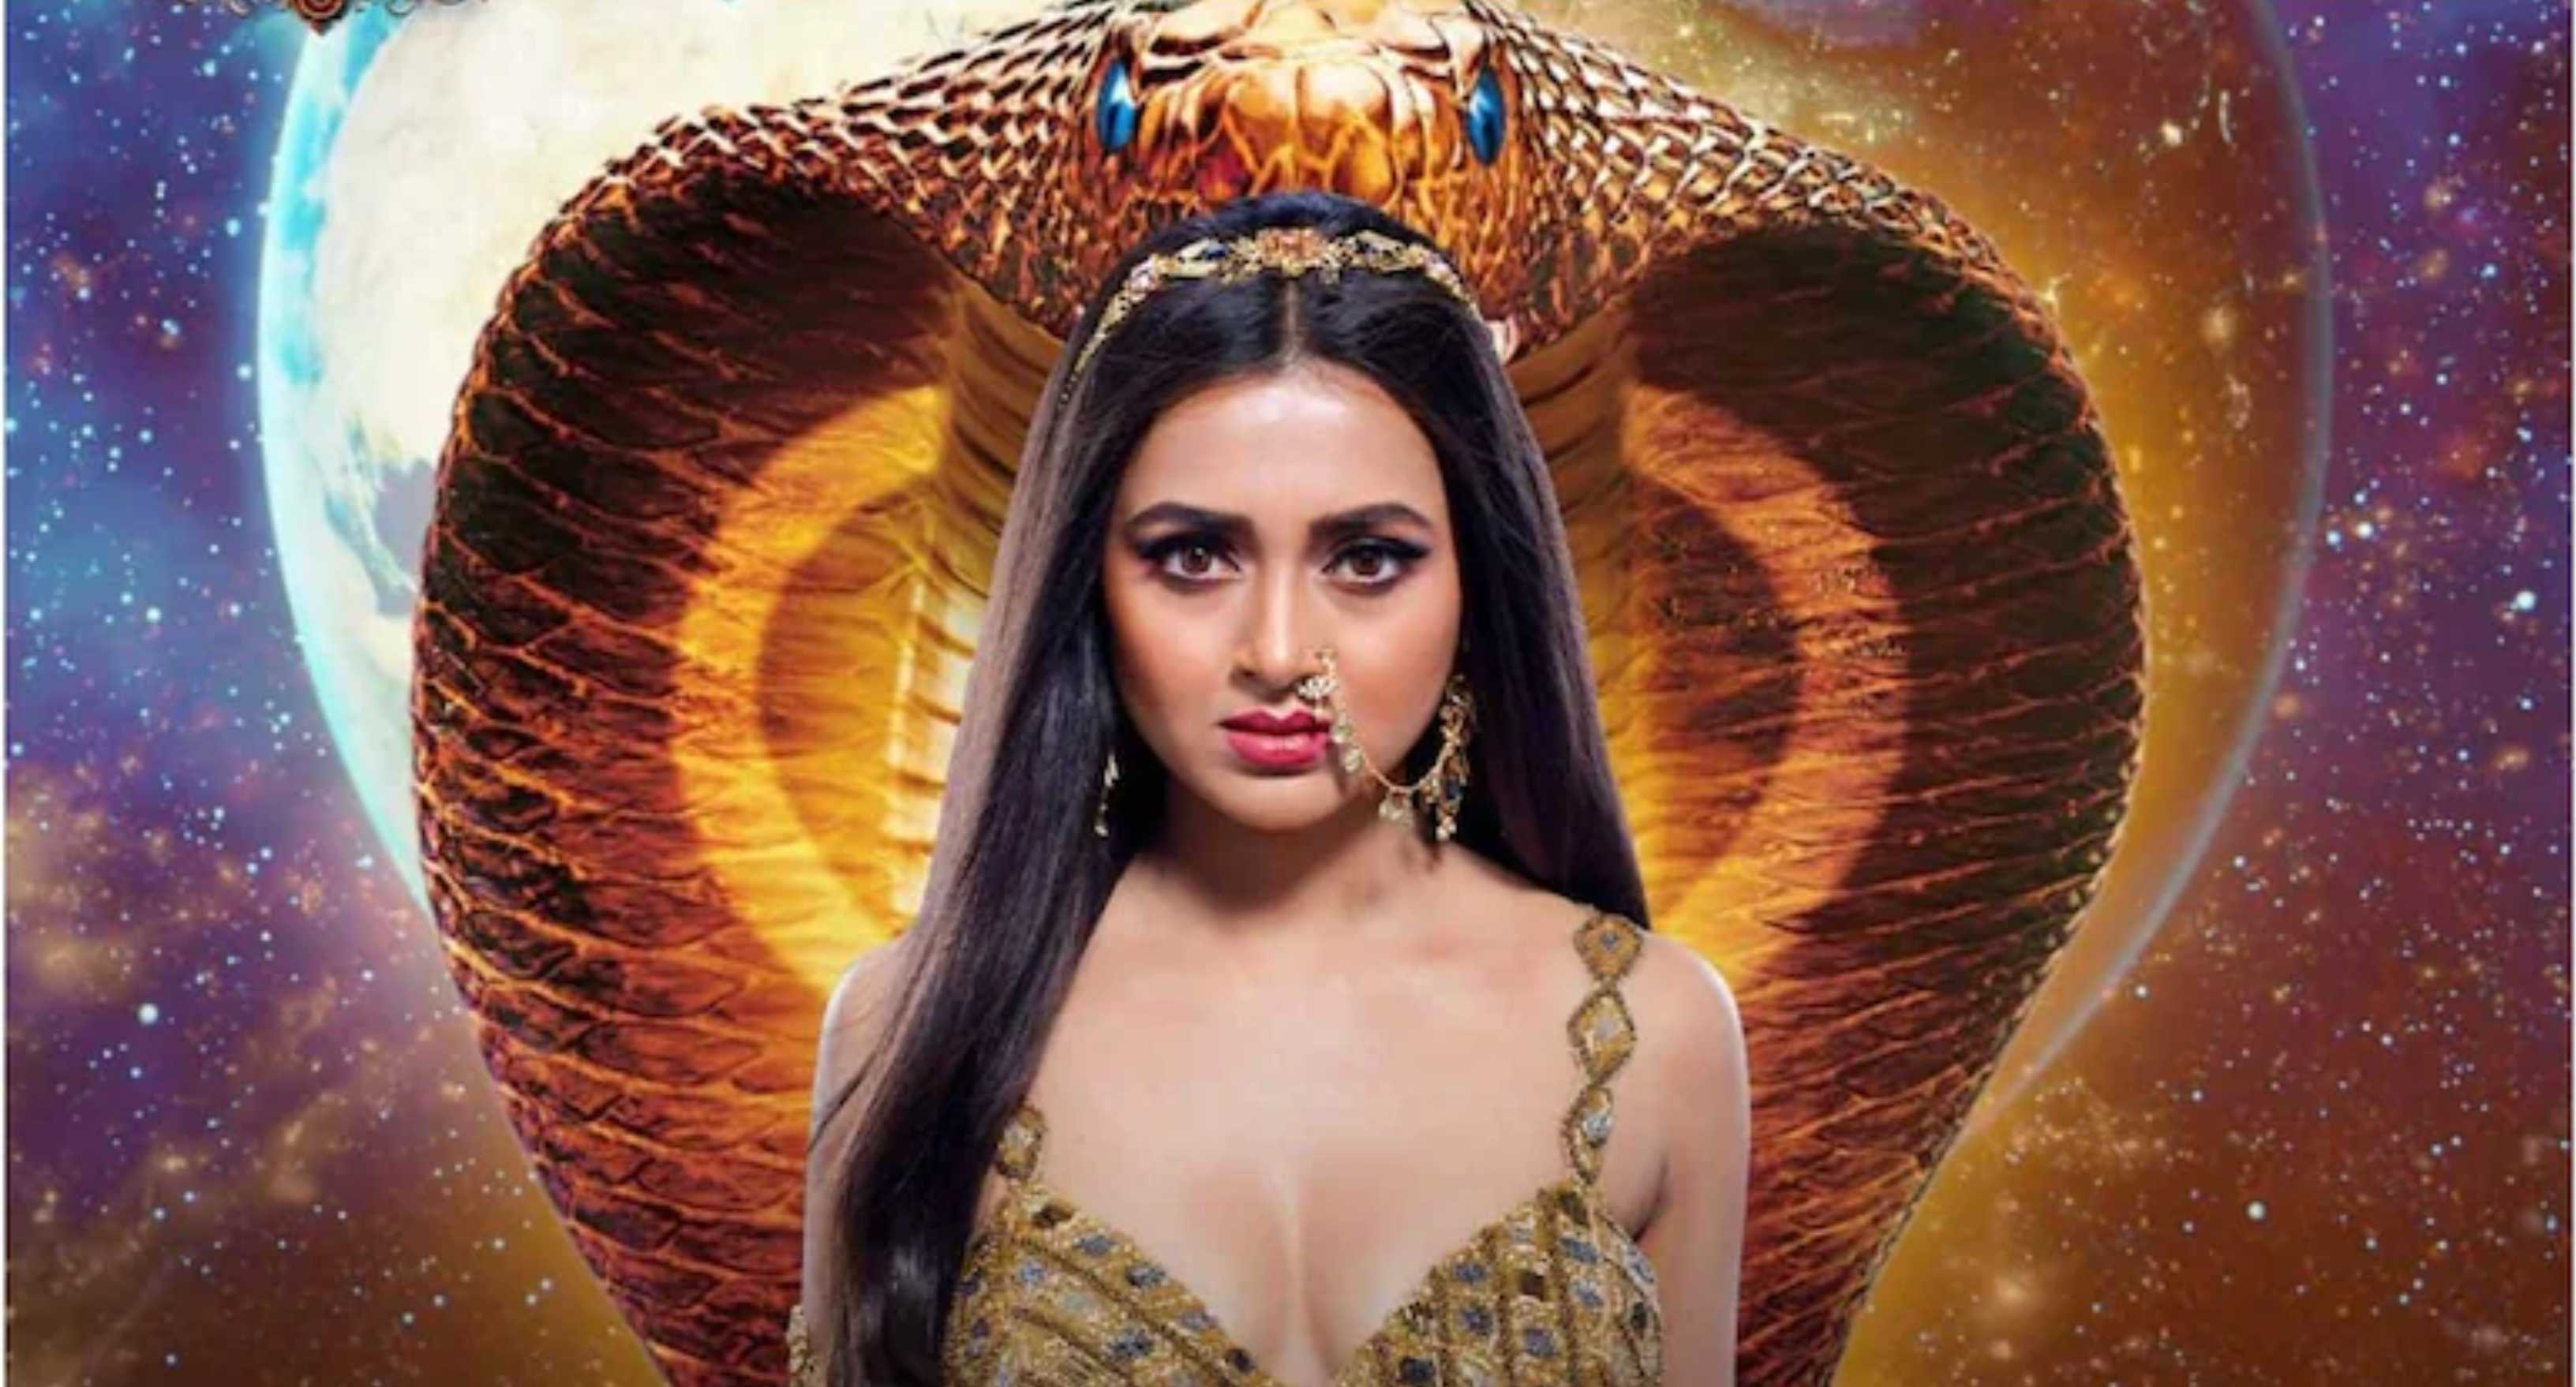 Tejasswi Prakash describes Ekta Kapoor’s Naagin as the most loved and watched fantasy franchise in India